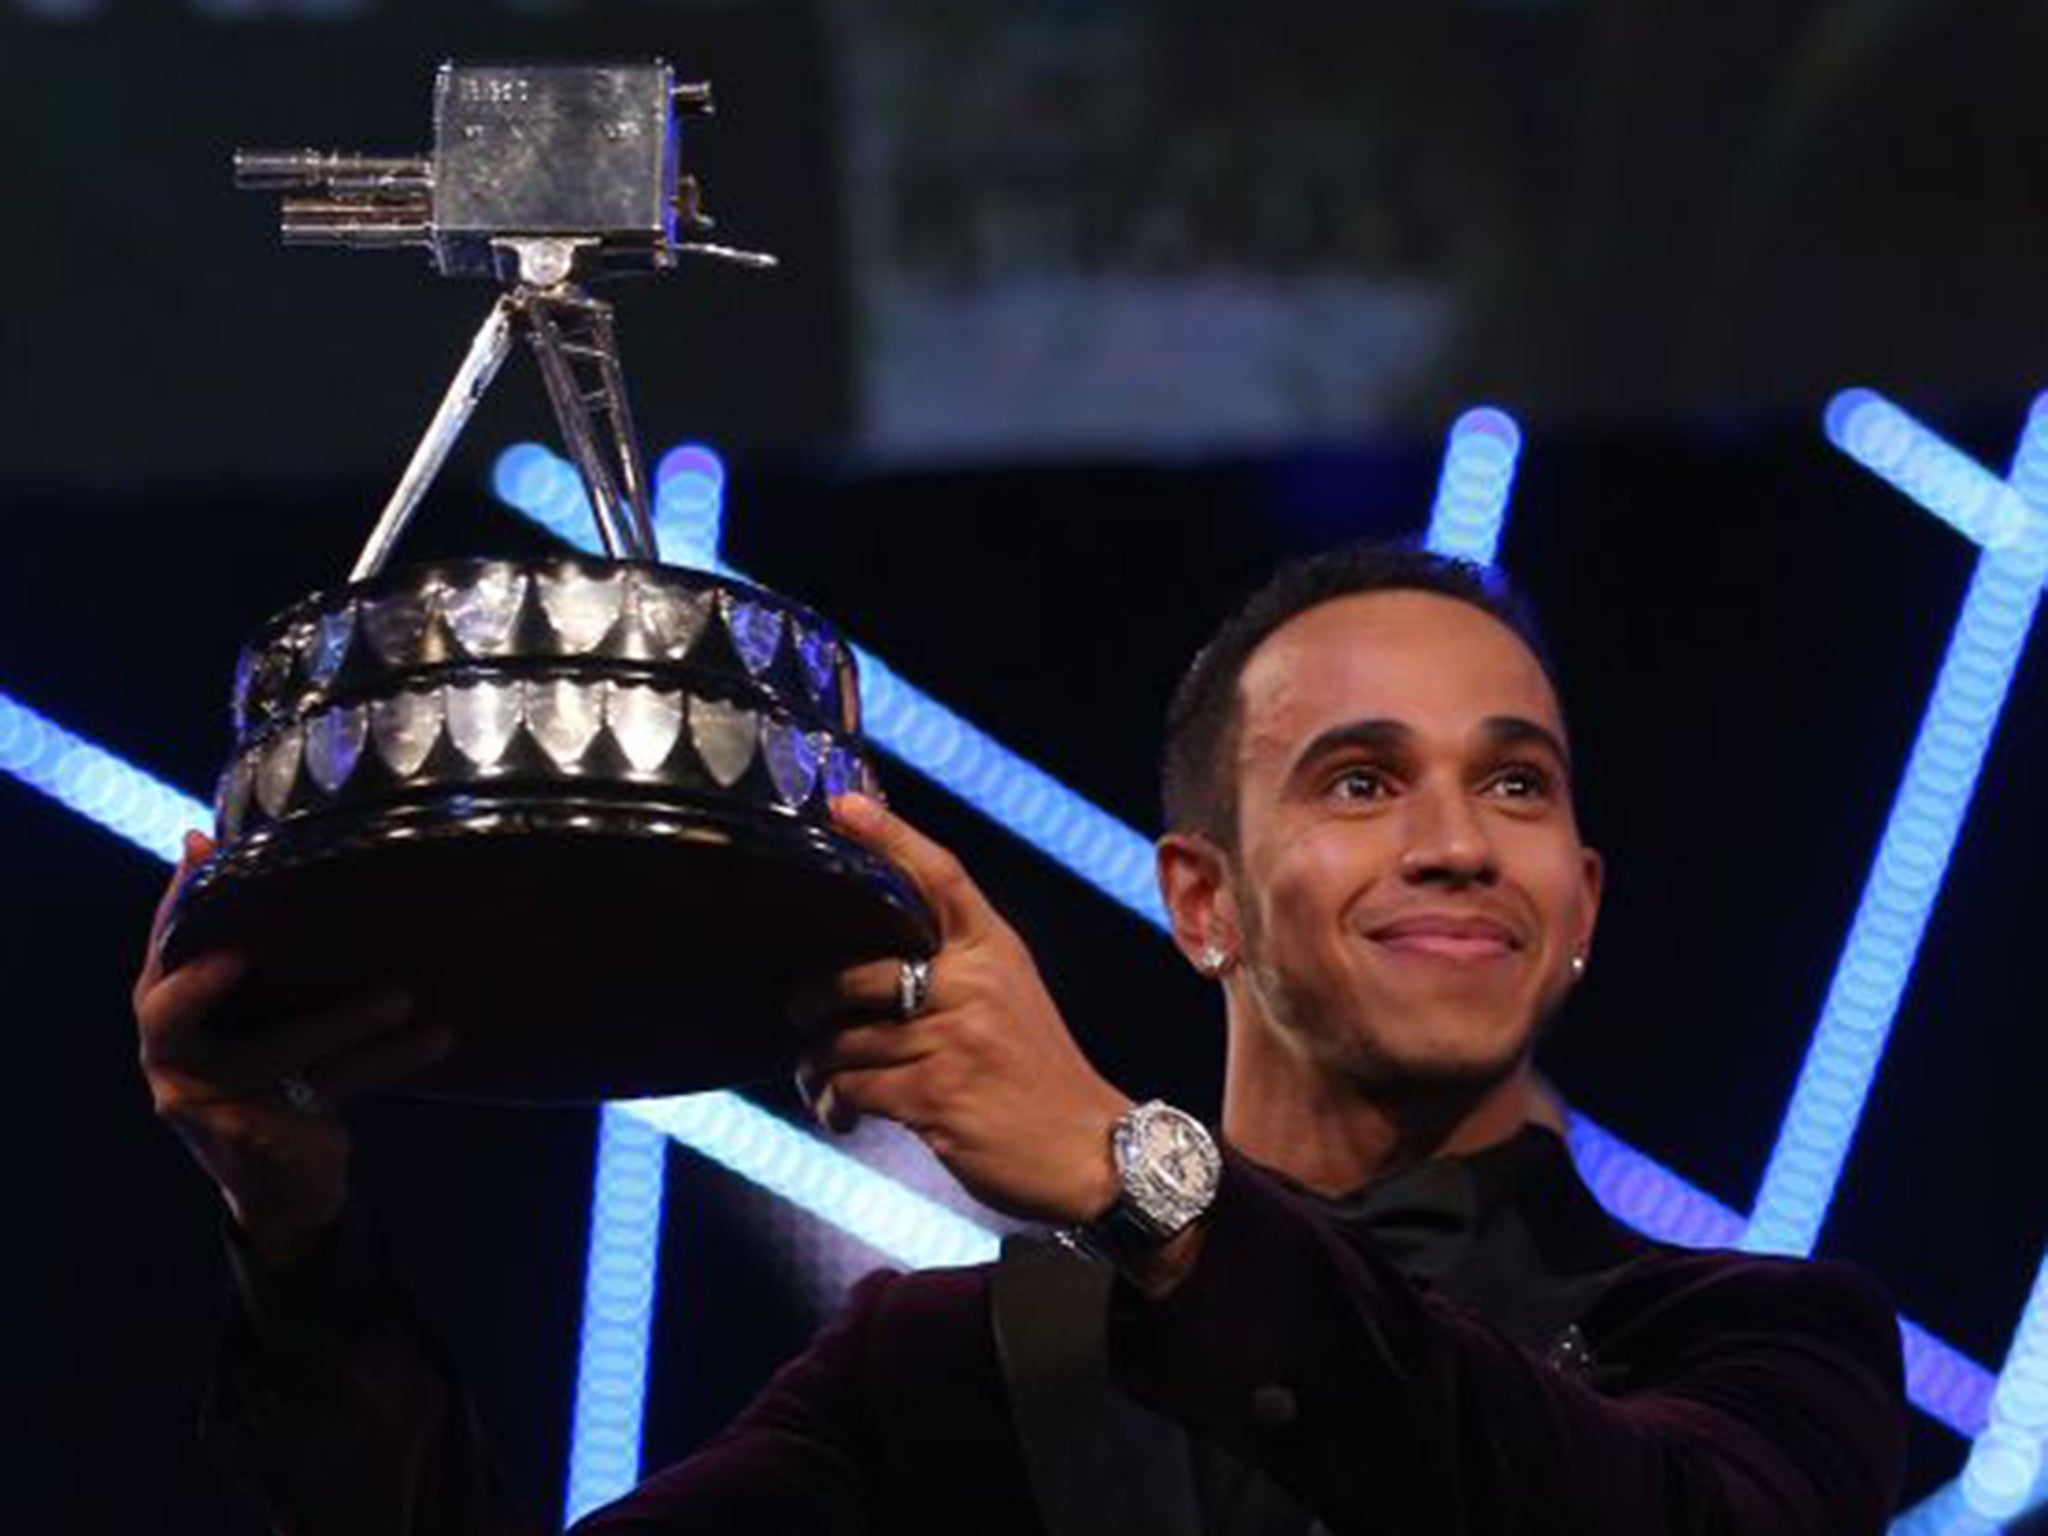 Lewis Hamilton becomes the first motor racing star to win the award since Damon Hill in 1996